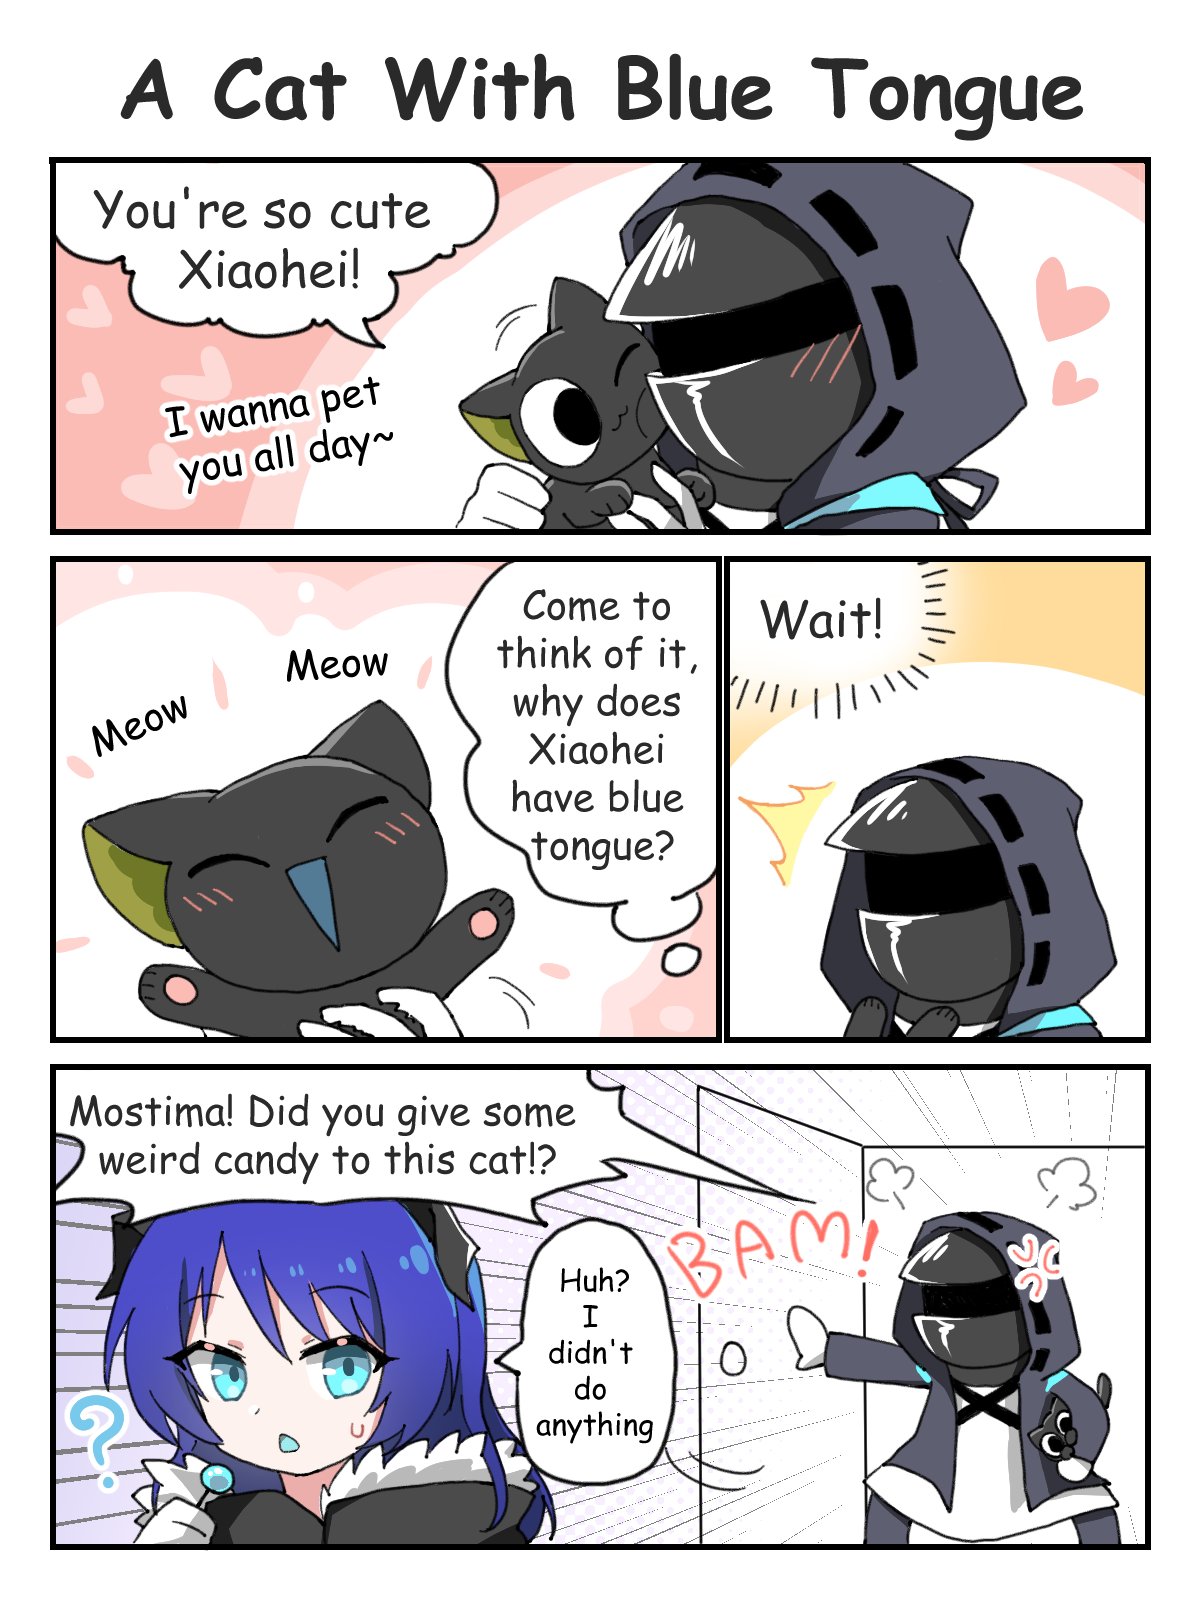 1boy 1girl 1other ? ambiguous_gender angry arknights black_cat blue_tongue blush cat colored_tongue confused doctor_(arknights) english_text gloves heart highres hood luo_xiaohei luo_xiaohei_zhanji mostima_(arknights) petting right-to-left_comic rinzy speech_bubble surprised sweatdrop white_gloves